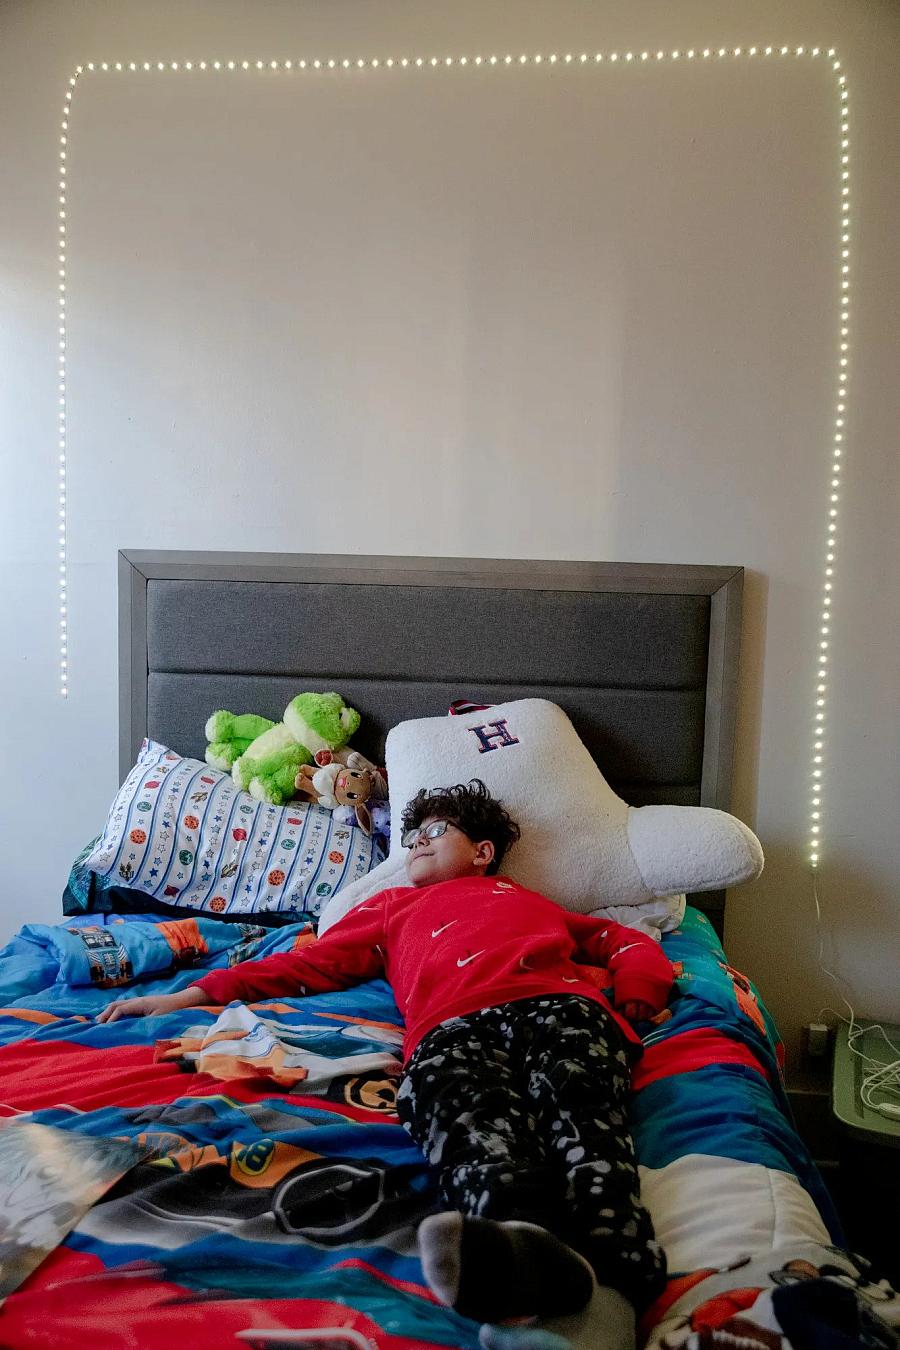 Kid lying on the bed